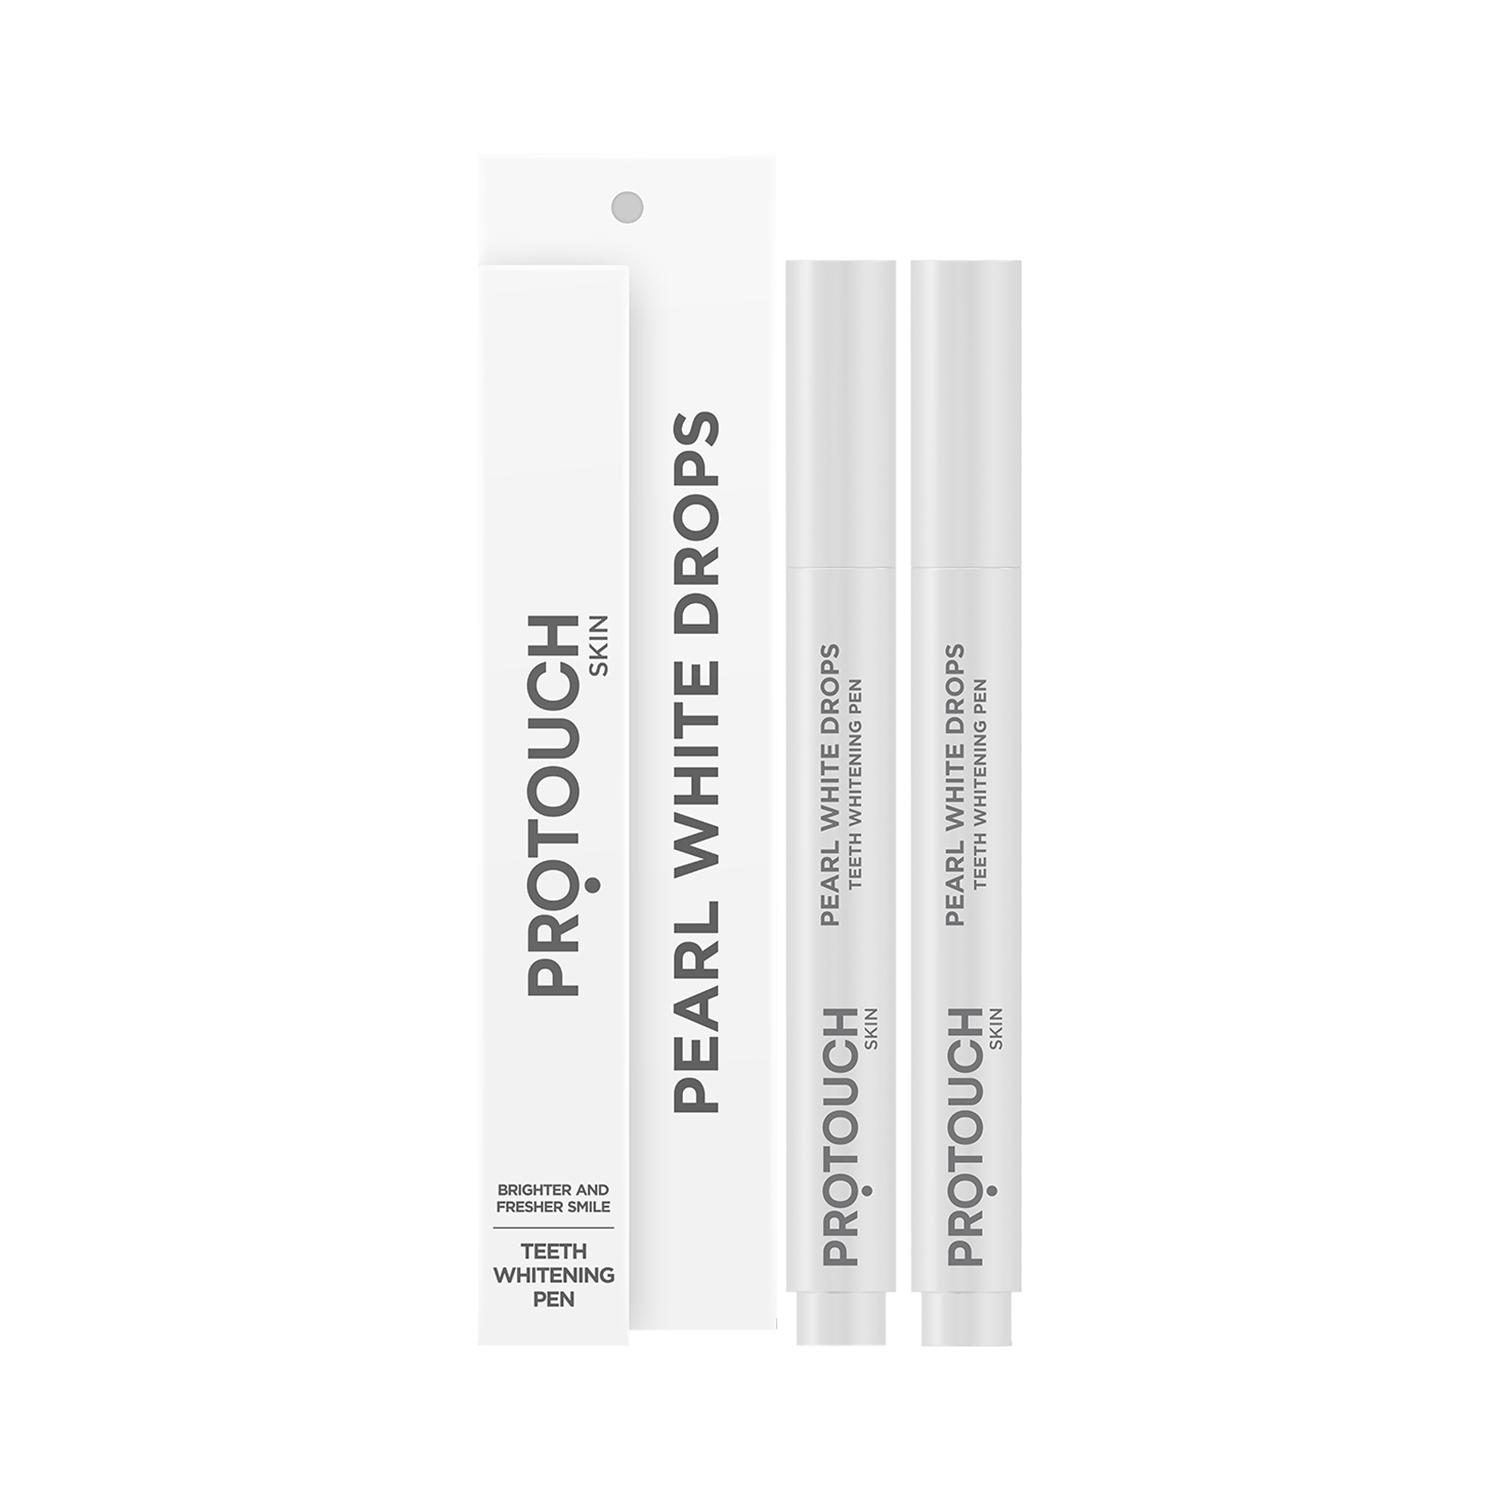 Protouch | Protouch Pearl White Drops, Teeth Whitening Pen Gel - Whiter Teeth & Fresher Breath Pack of 2 Combo